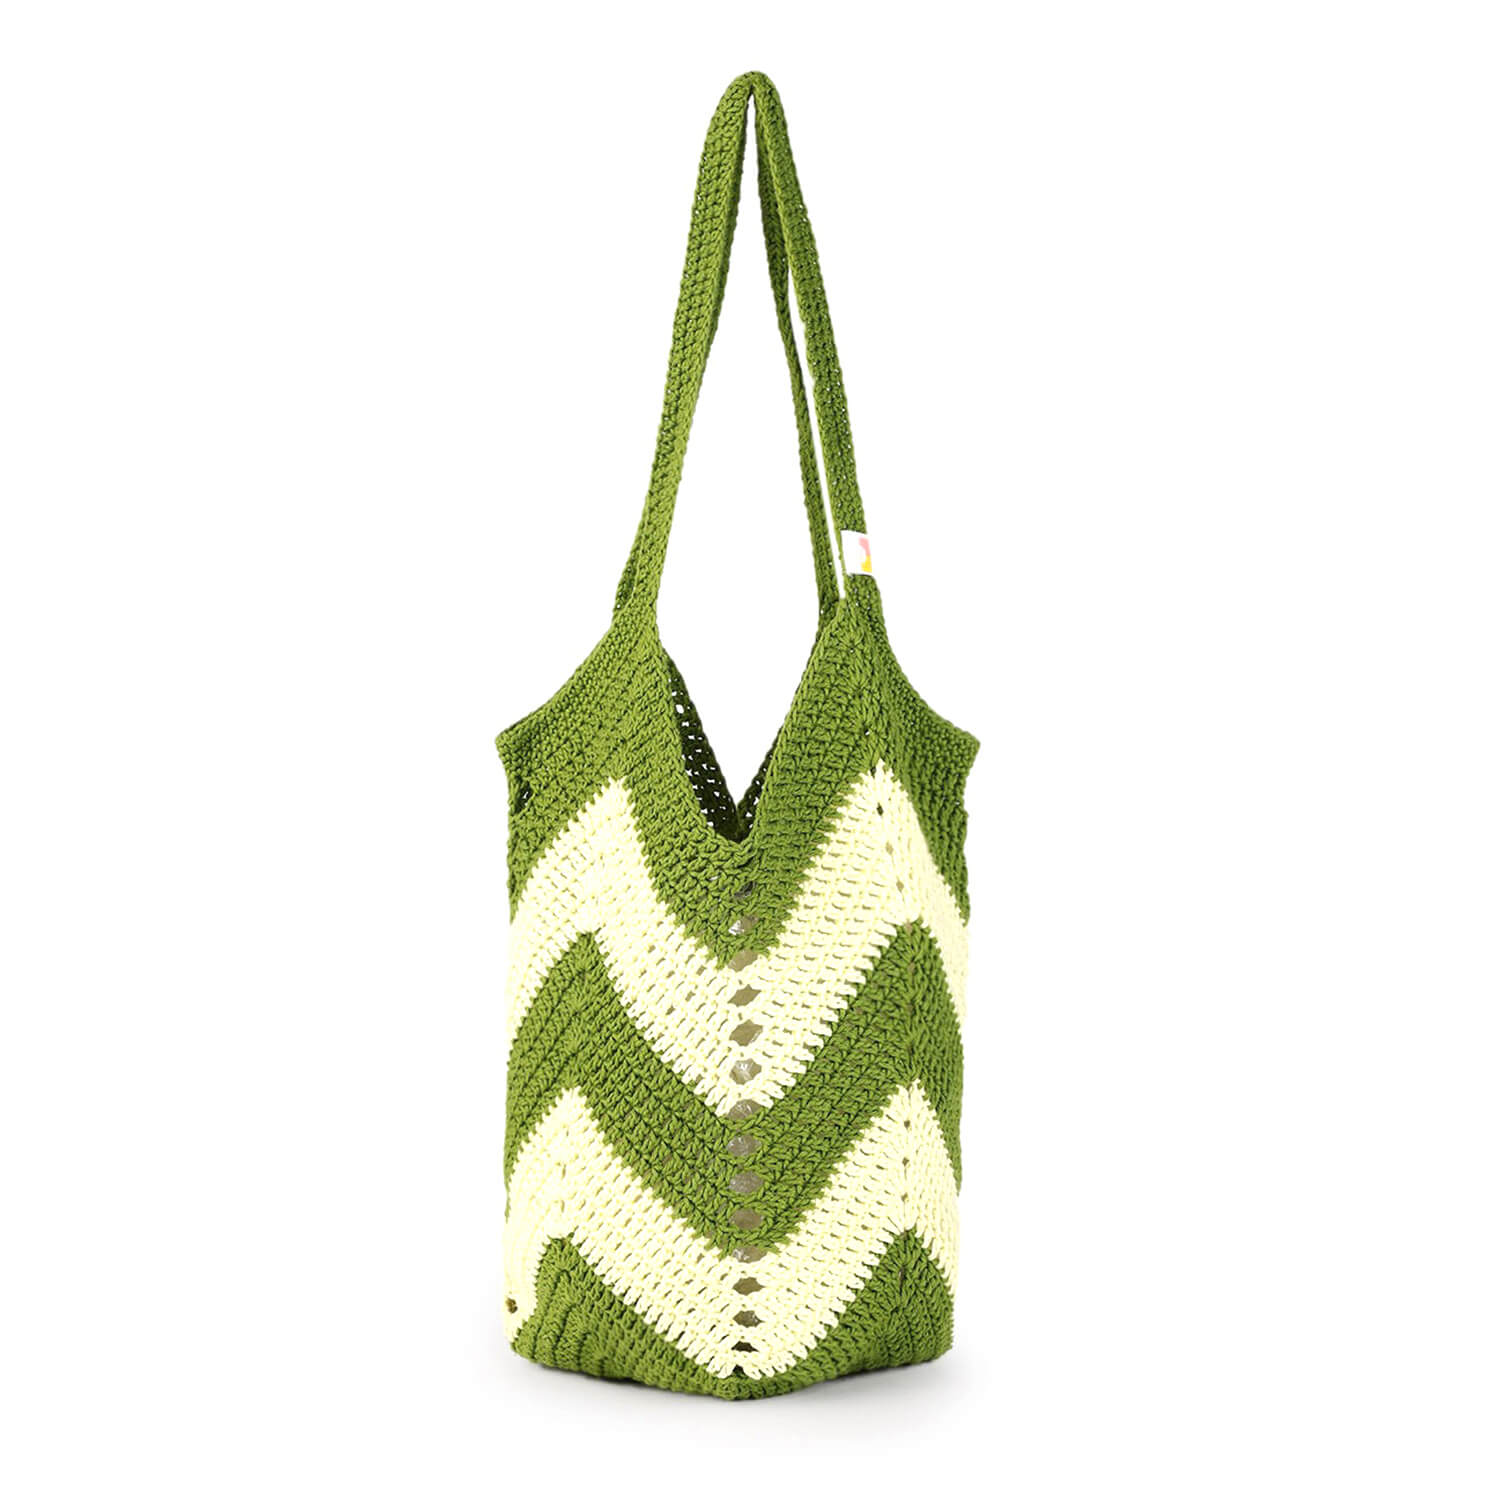 Market Bag, Plastic - Recycled Plastic products by XSProject